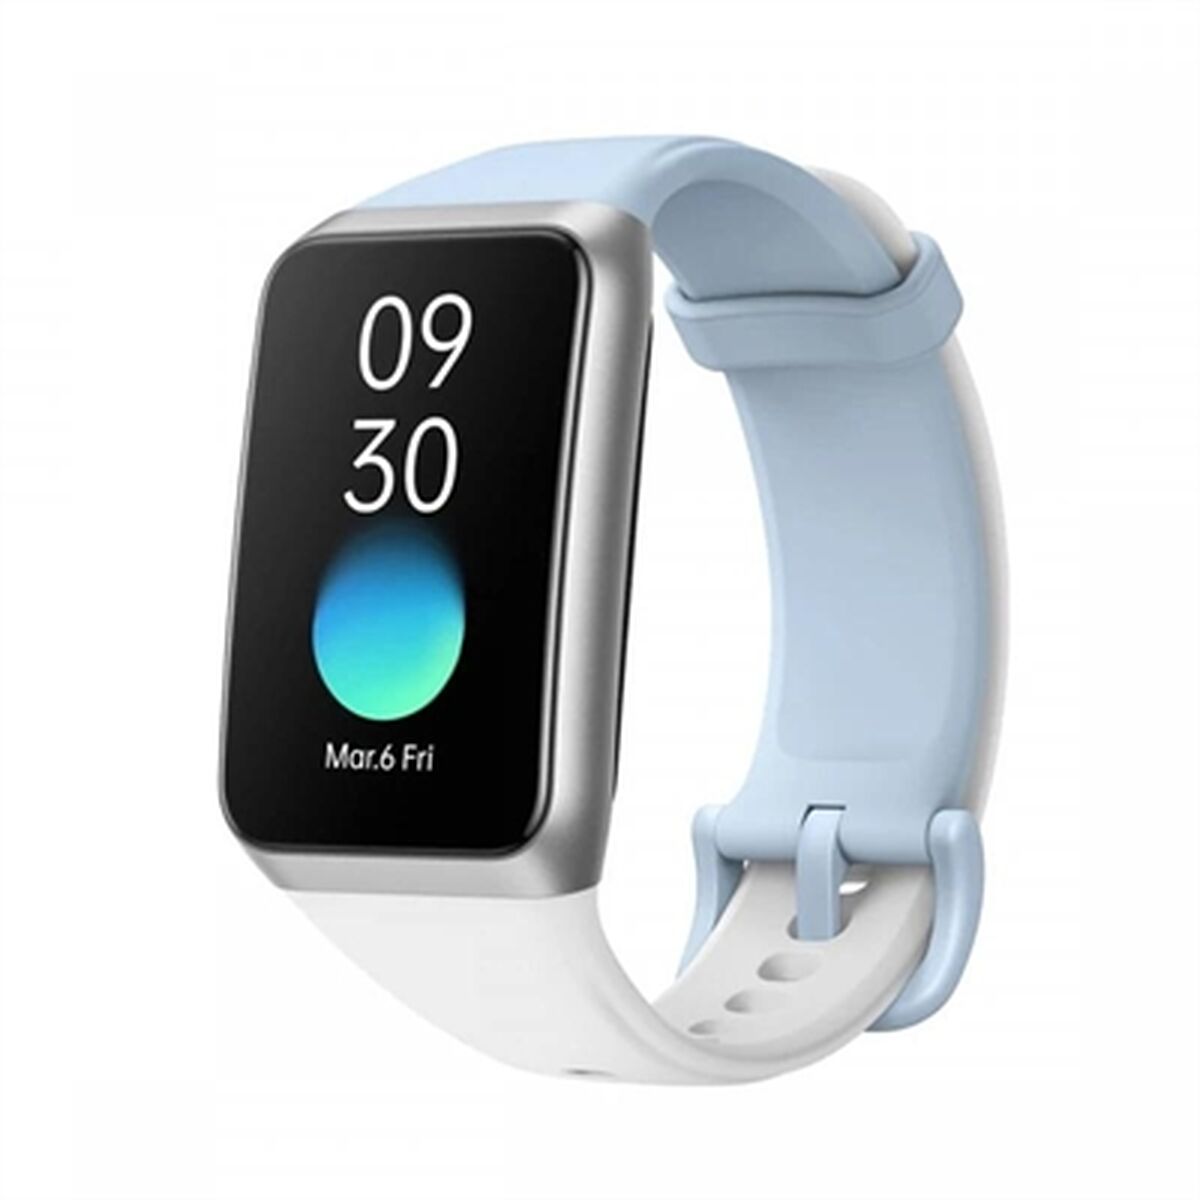 Smartwatch Oppo Band 2 1,57" Blue White Blue/White, Oppo, Electronics, smartwatch-oppo-band-2-1-57-blue-white-blue-white, Brand_Oppo, category-reference-2609, category-reference-2617, category-reference-2634, category-reference-t-19653, category-reference-t-4082, Condition_NEW, original gifts, Price_50 - 100, telephones & tablets, Teleworking, wifi y bluetooth, RiotNook